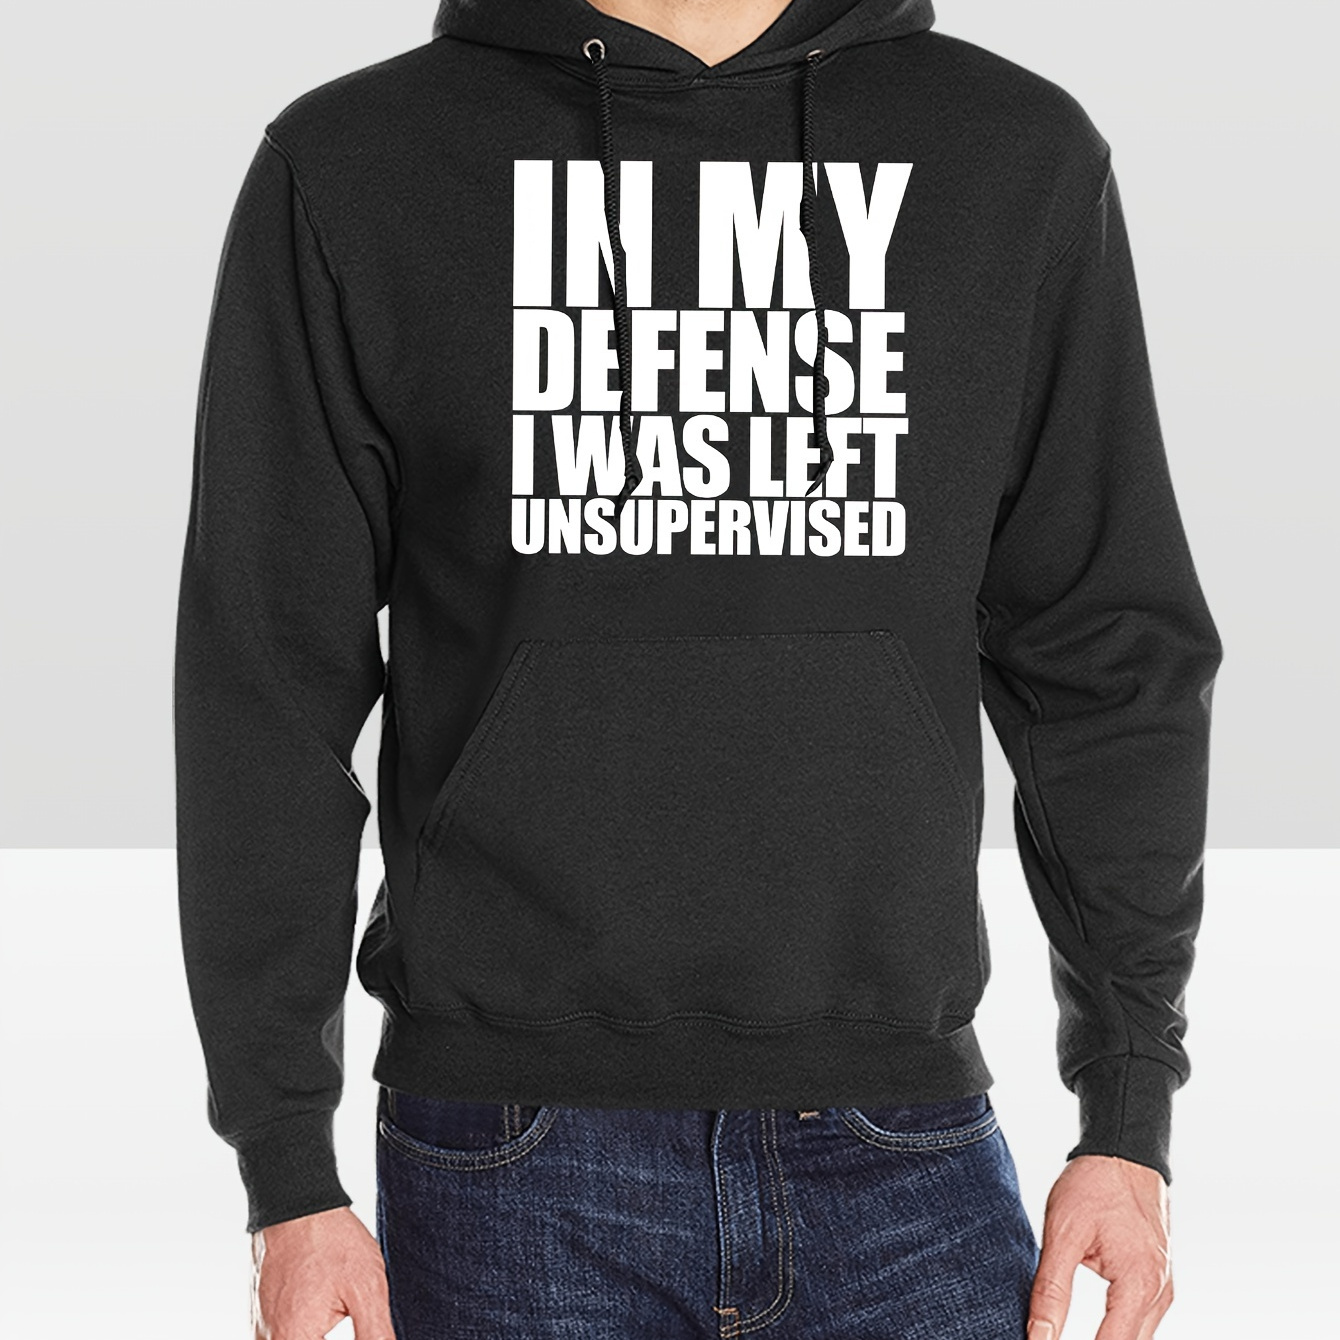 

Men's Front Print Kangaroo Pocket Hoodie In My Defense I Was Left Unsupervised 100% Cotton Funny Graphic Hoodies Autumn Casual Hoodies